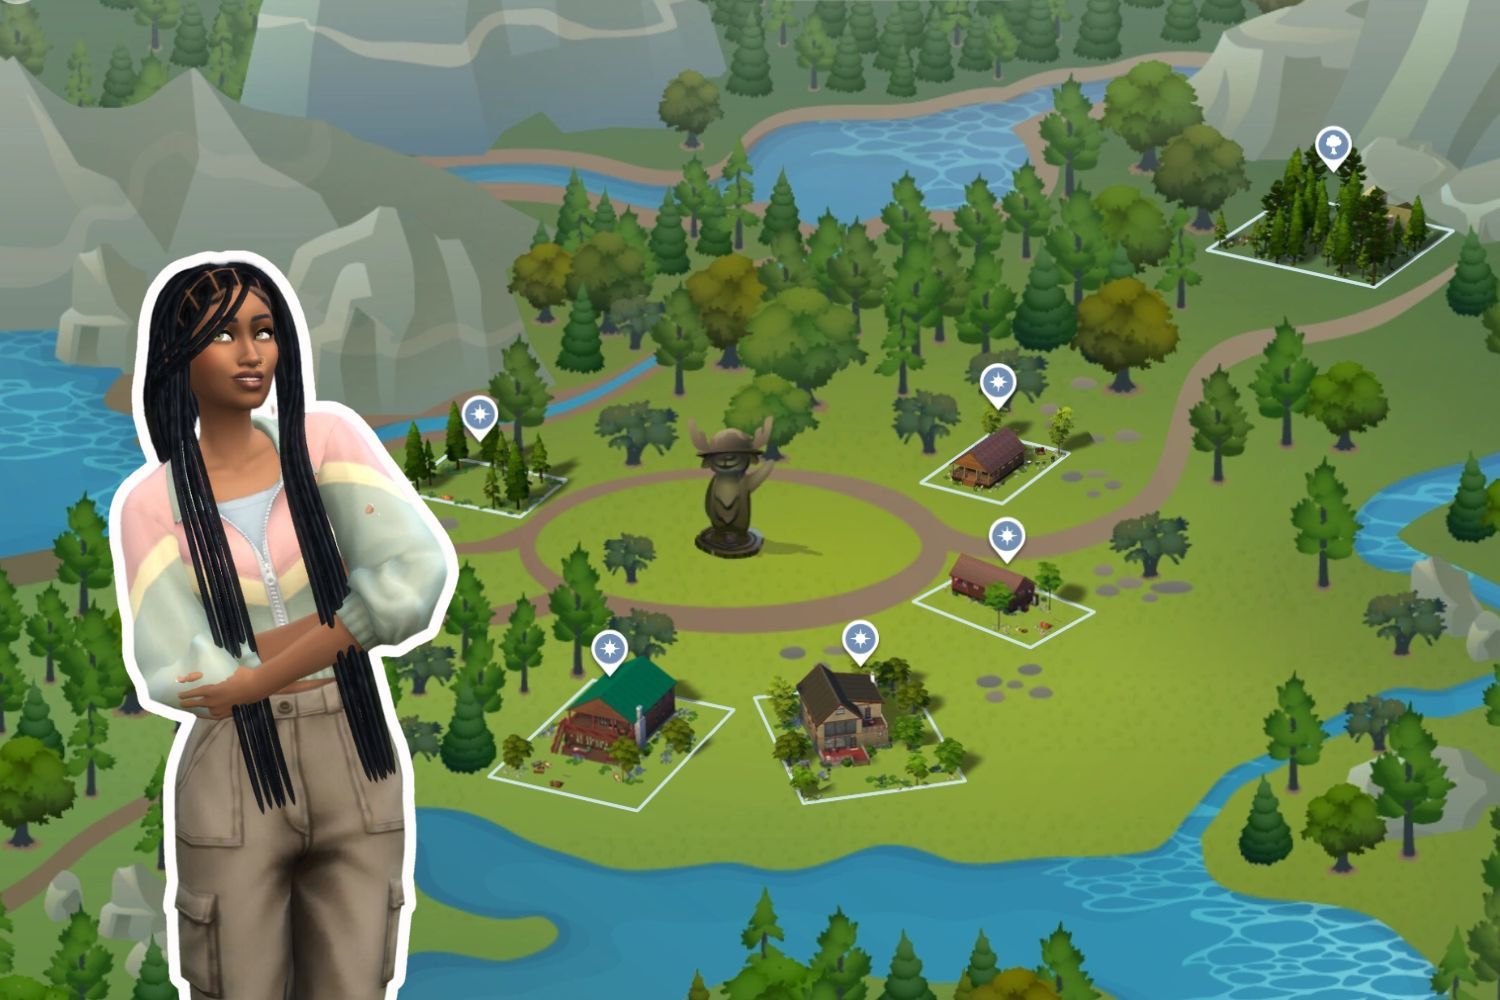 The Sim from the other photos wears an outdoorsy ensemble and stands in good spirits over a map of Granite Falls.